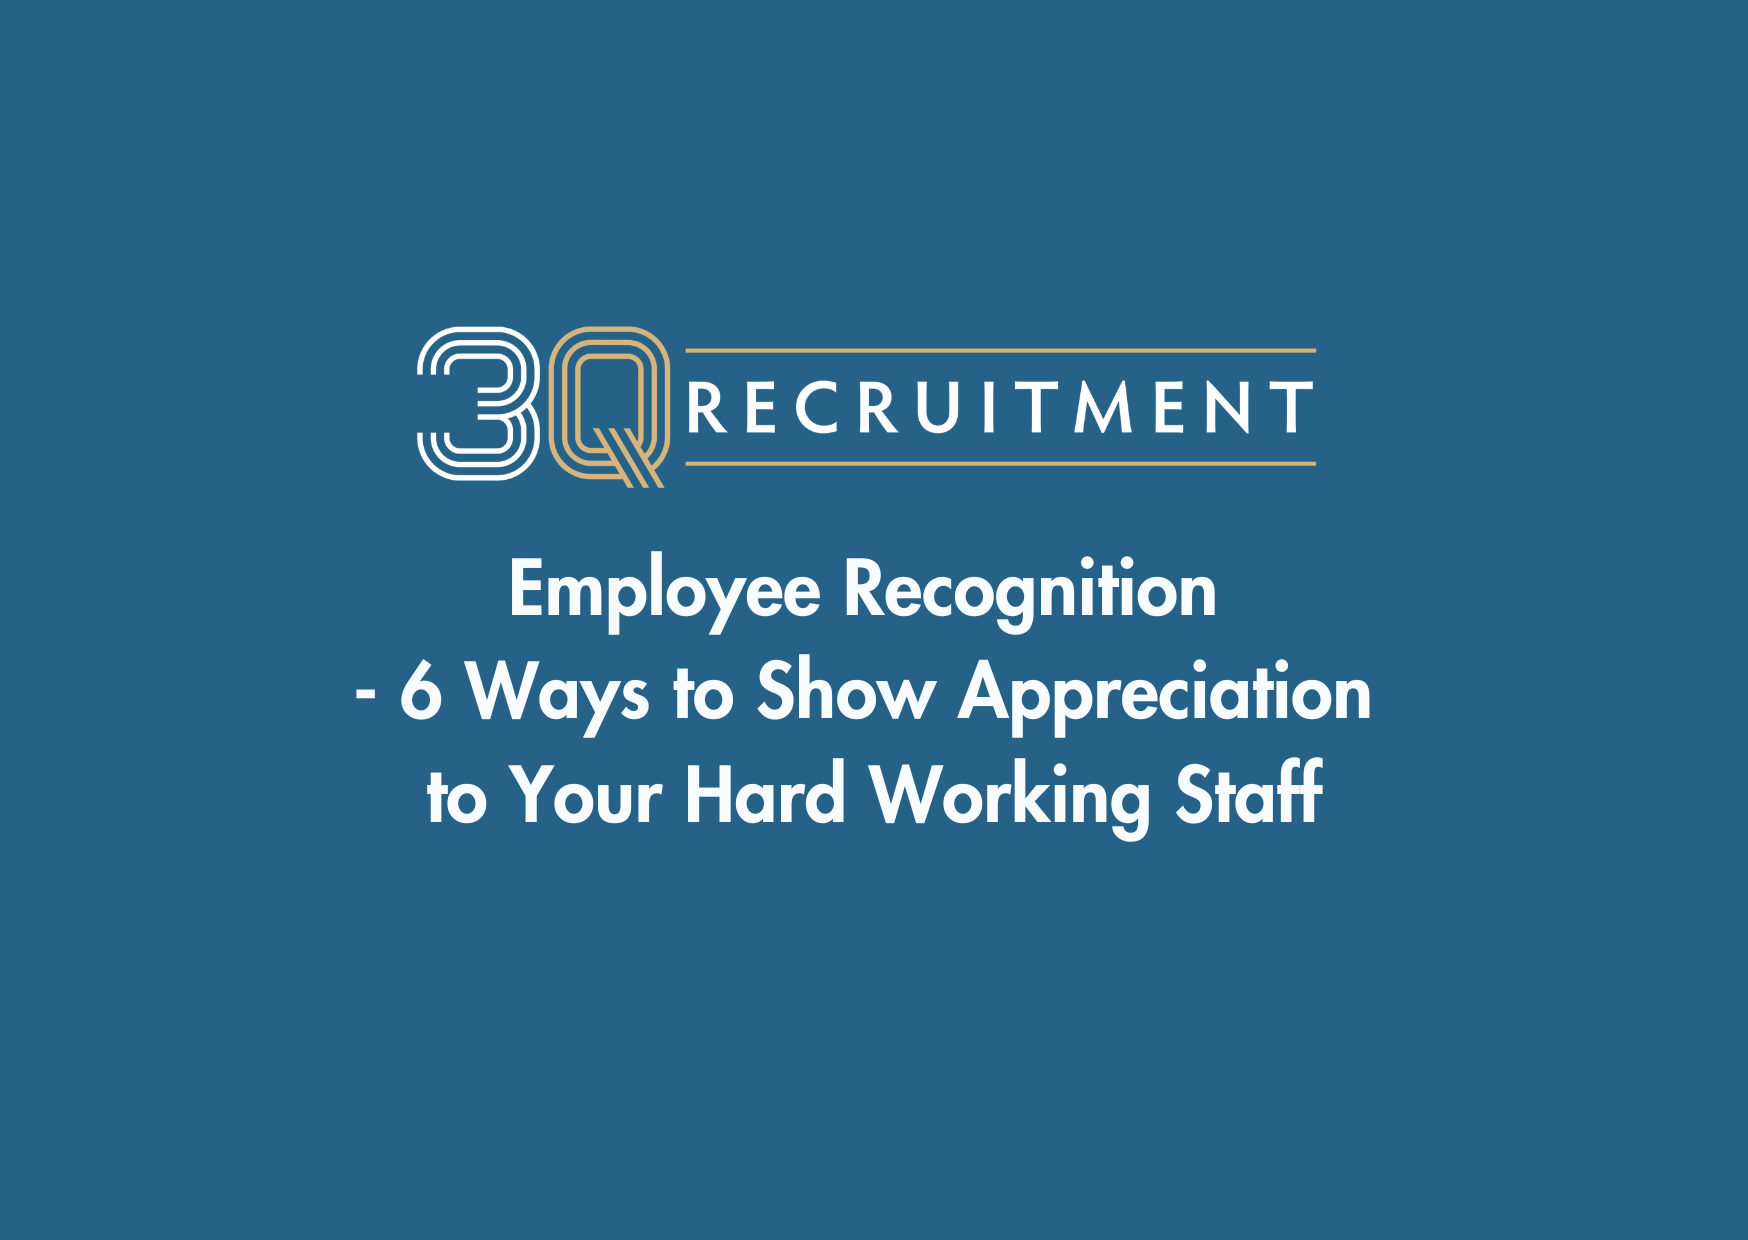 3Q Recruitment Employee Recognition - 6 Ways to show appreciation to your hard working staff